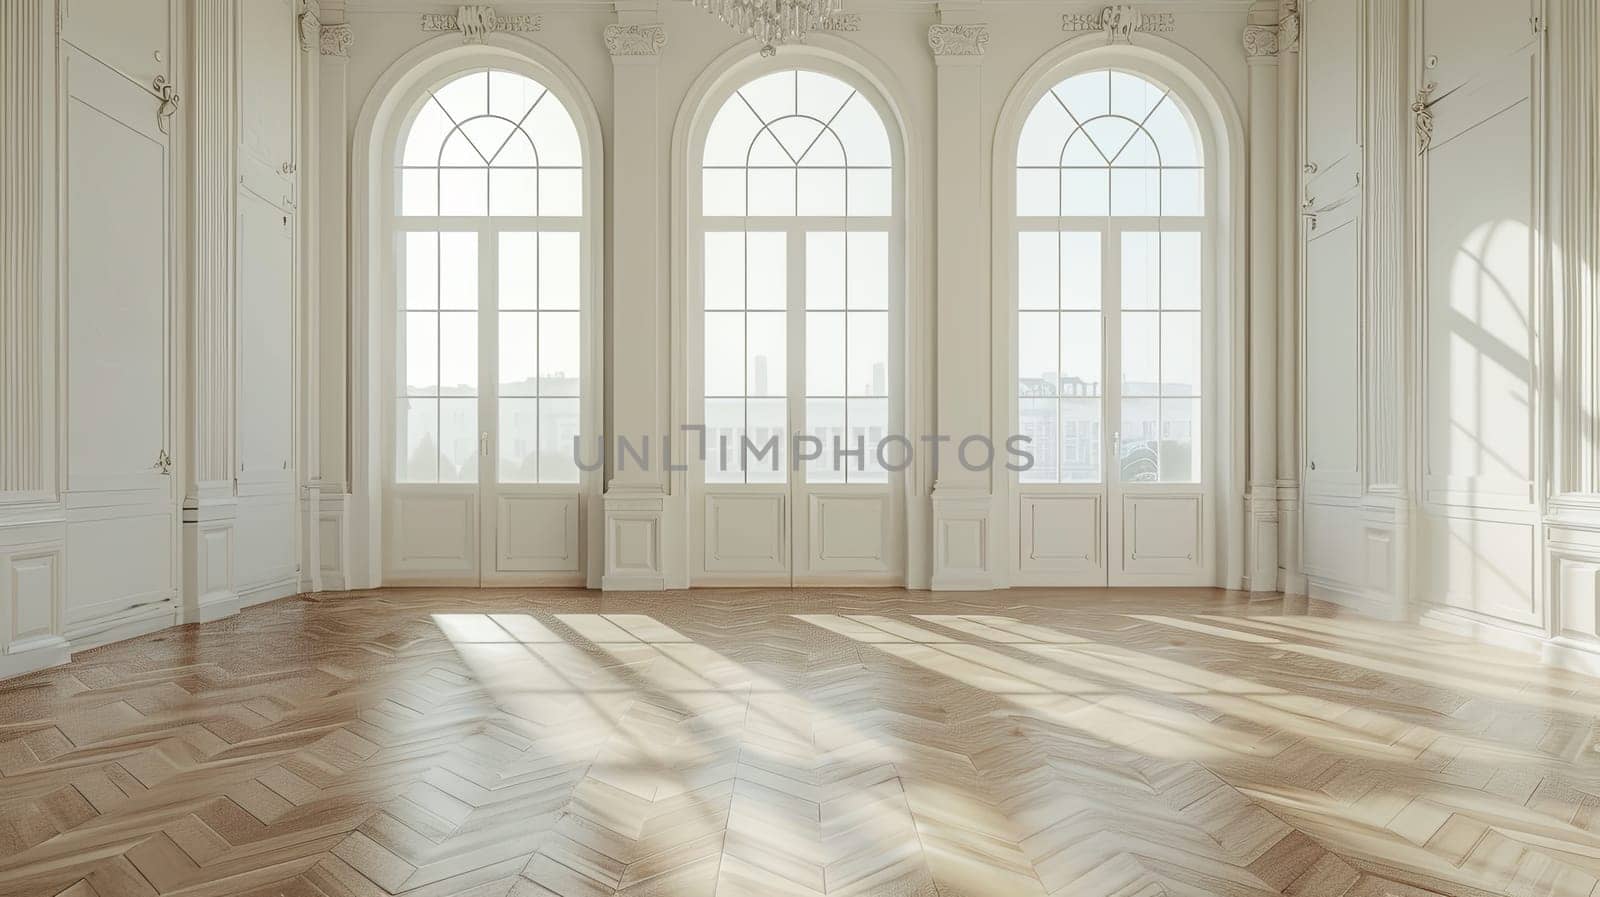 A vintage-style room with big windows and wooden floors, showcasing a spacious interior.